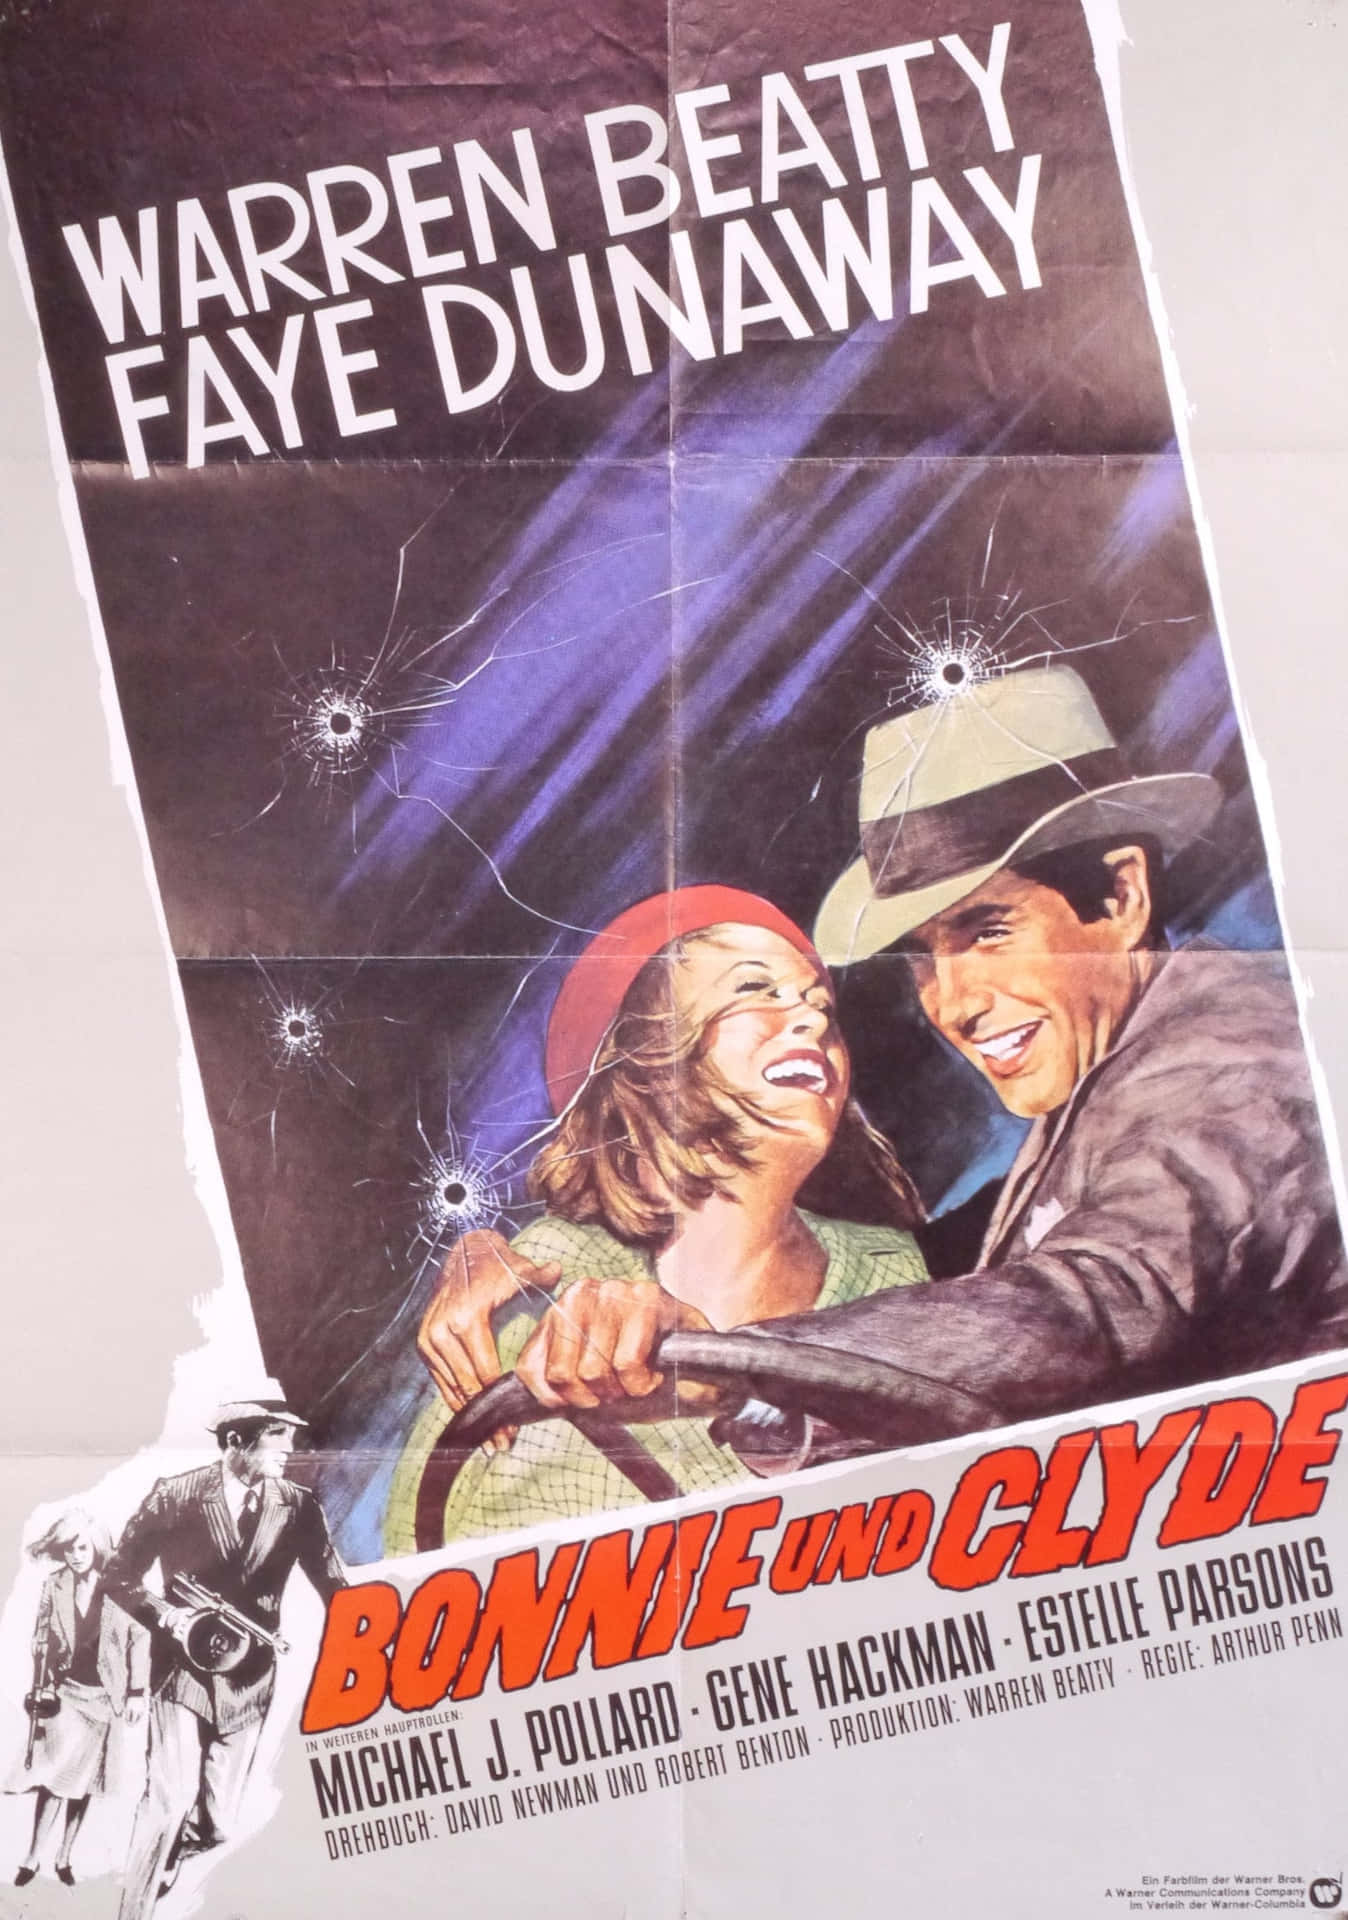 A Movie Poster For The Movie Bowie And Clyde